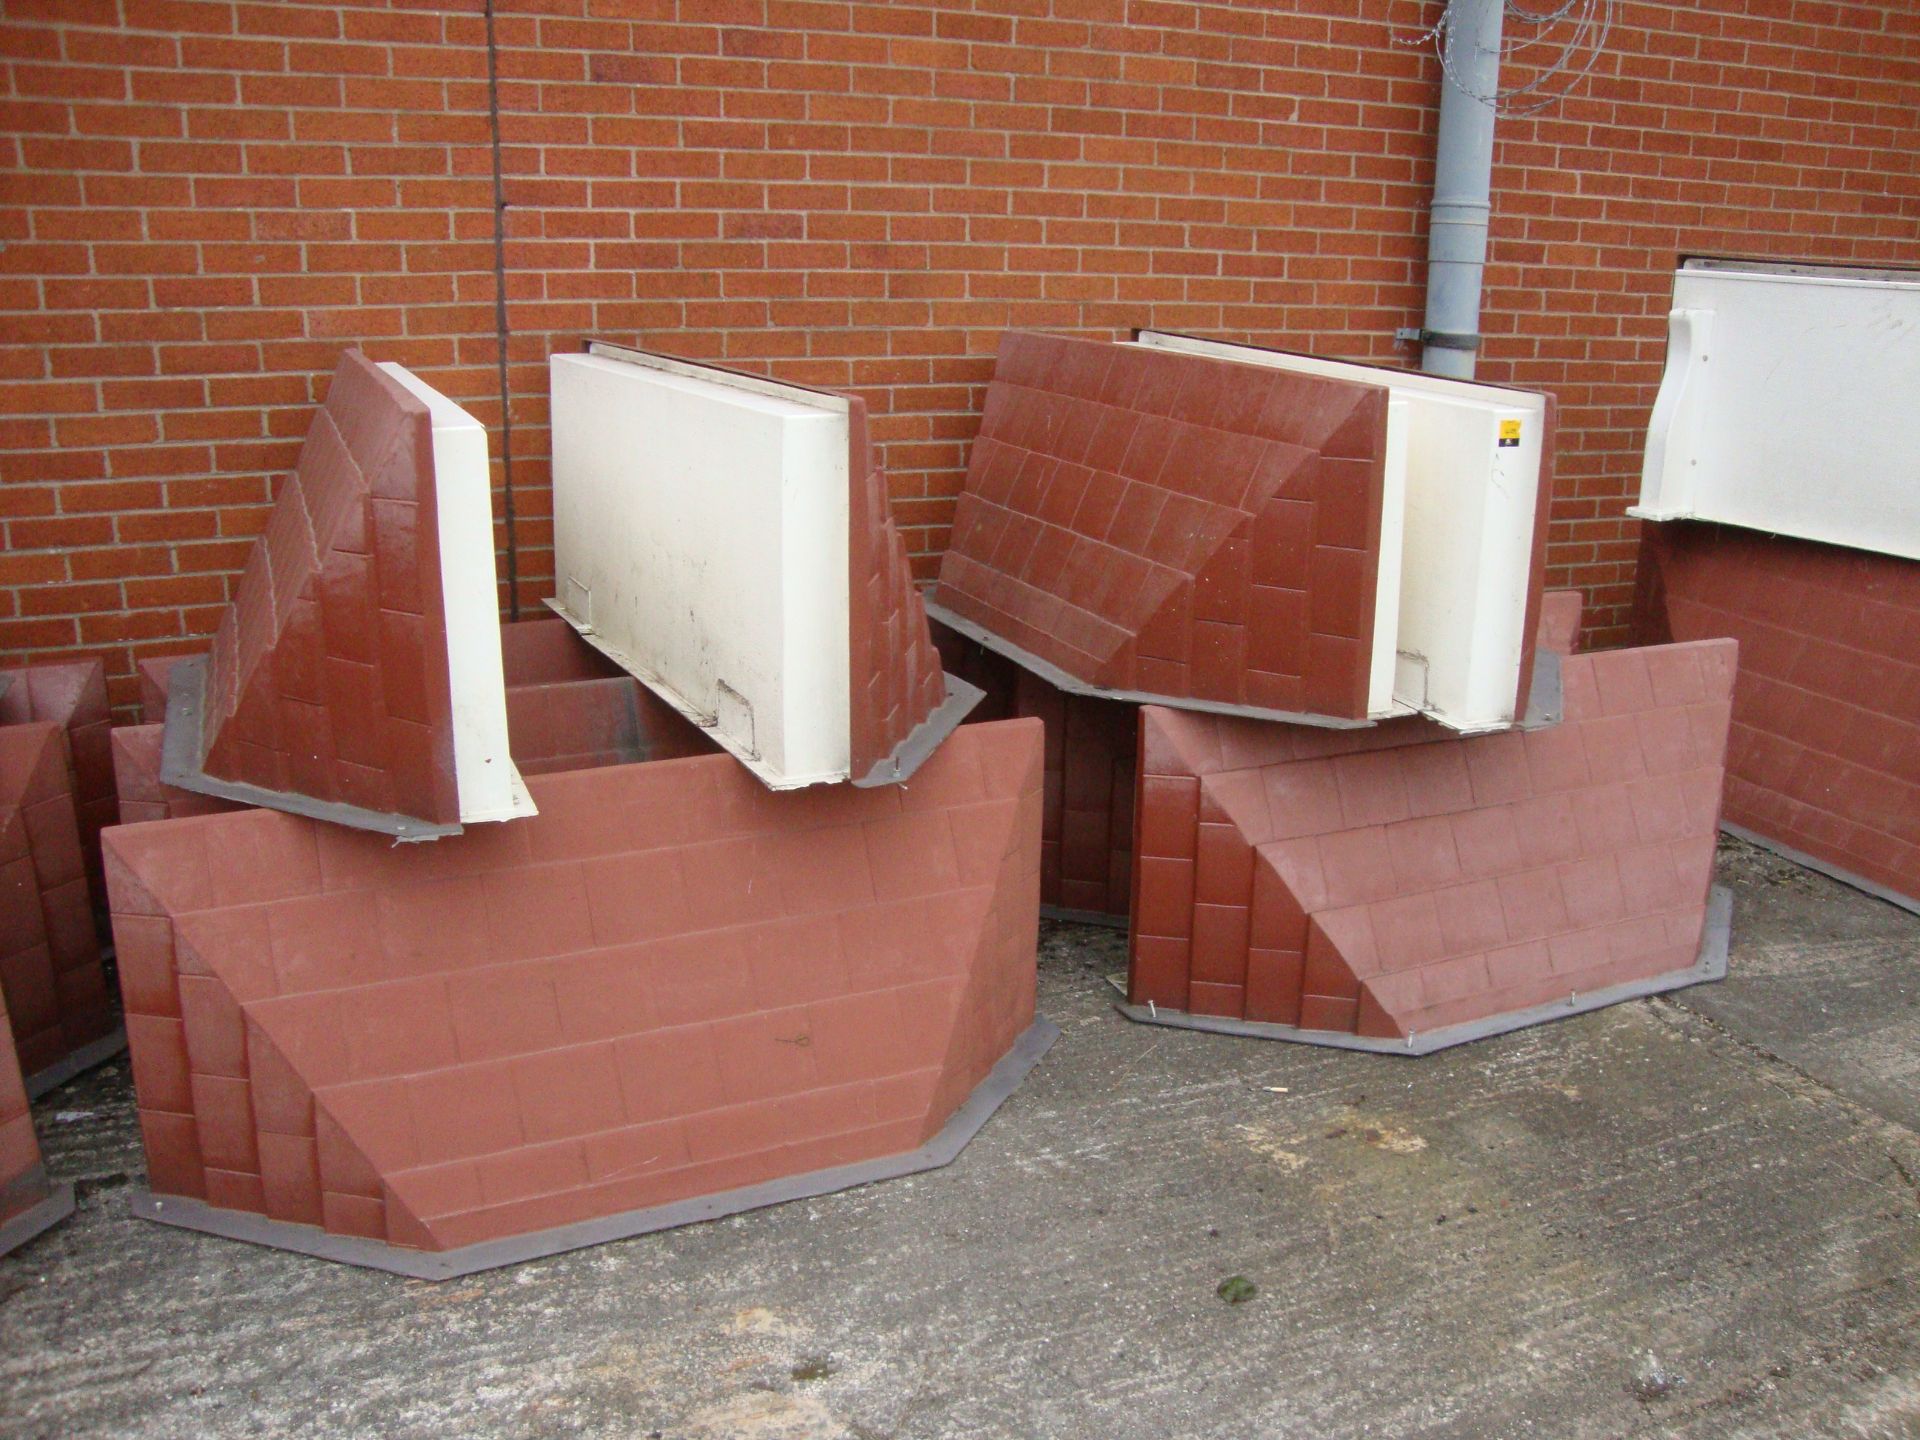 10 off canopies in brick red & white colour, each circa 1.66m wide, for exterior use above a - Image 4 of 4